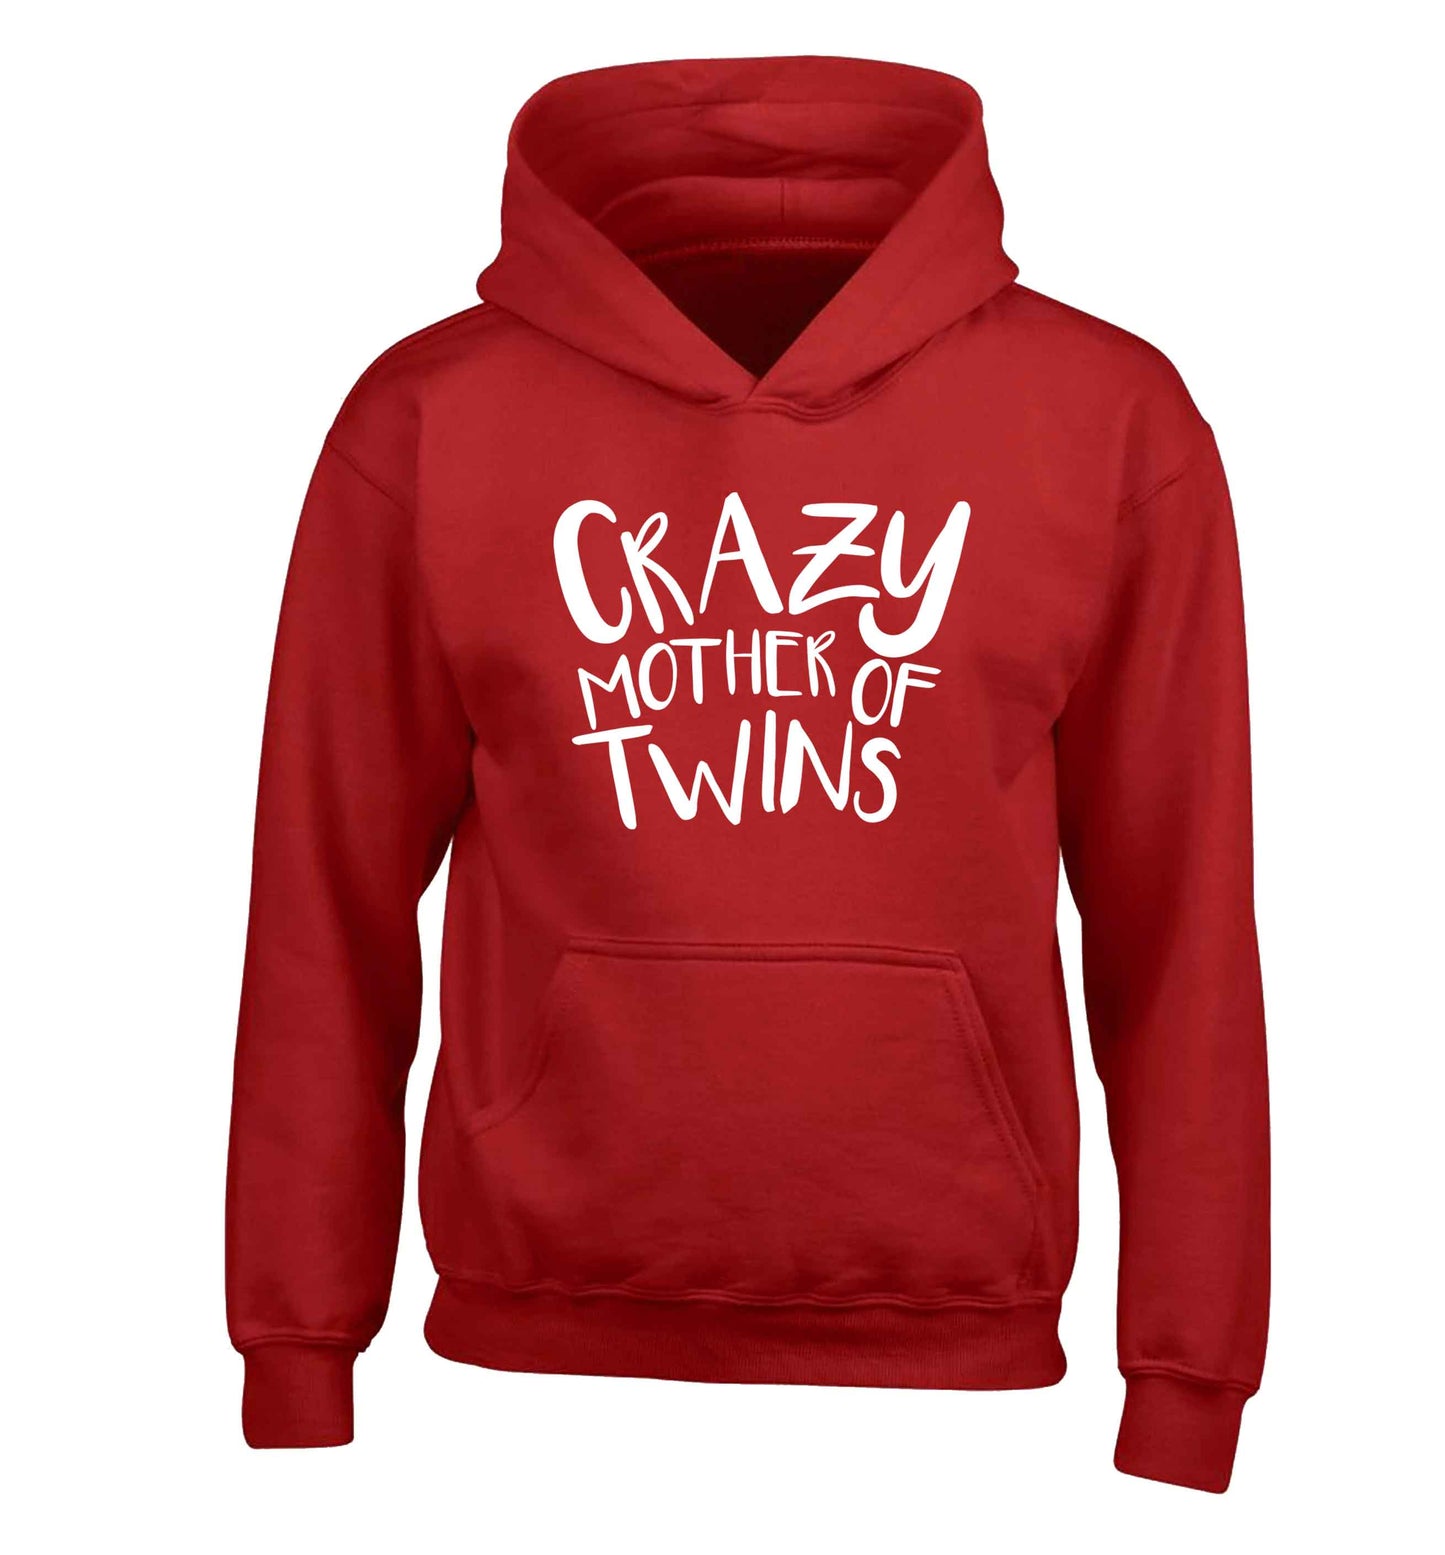 Crazy mother of twins children's red hoodie 12-13 Years